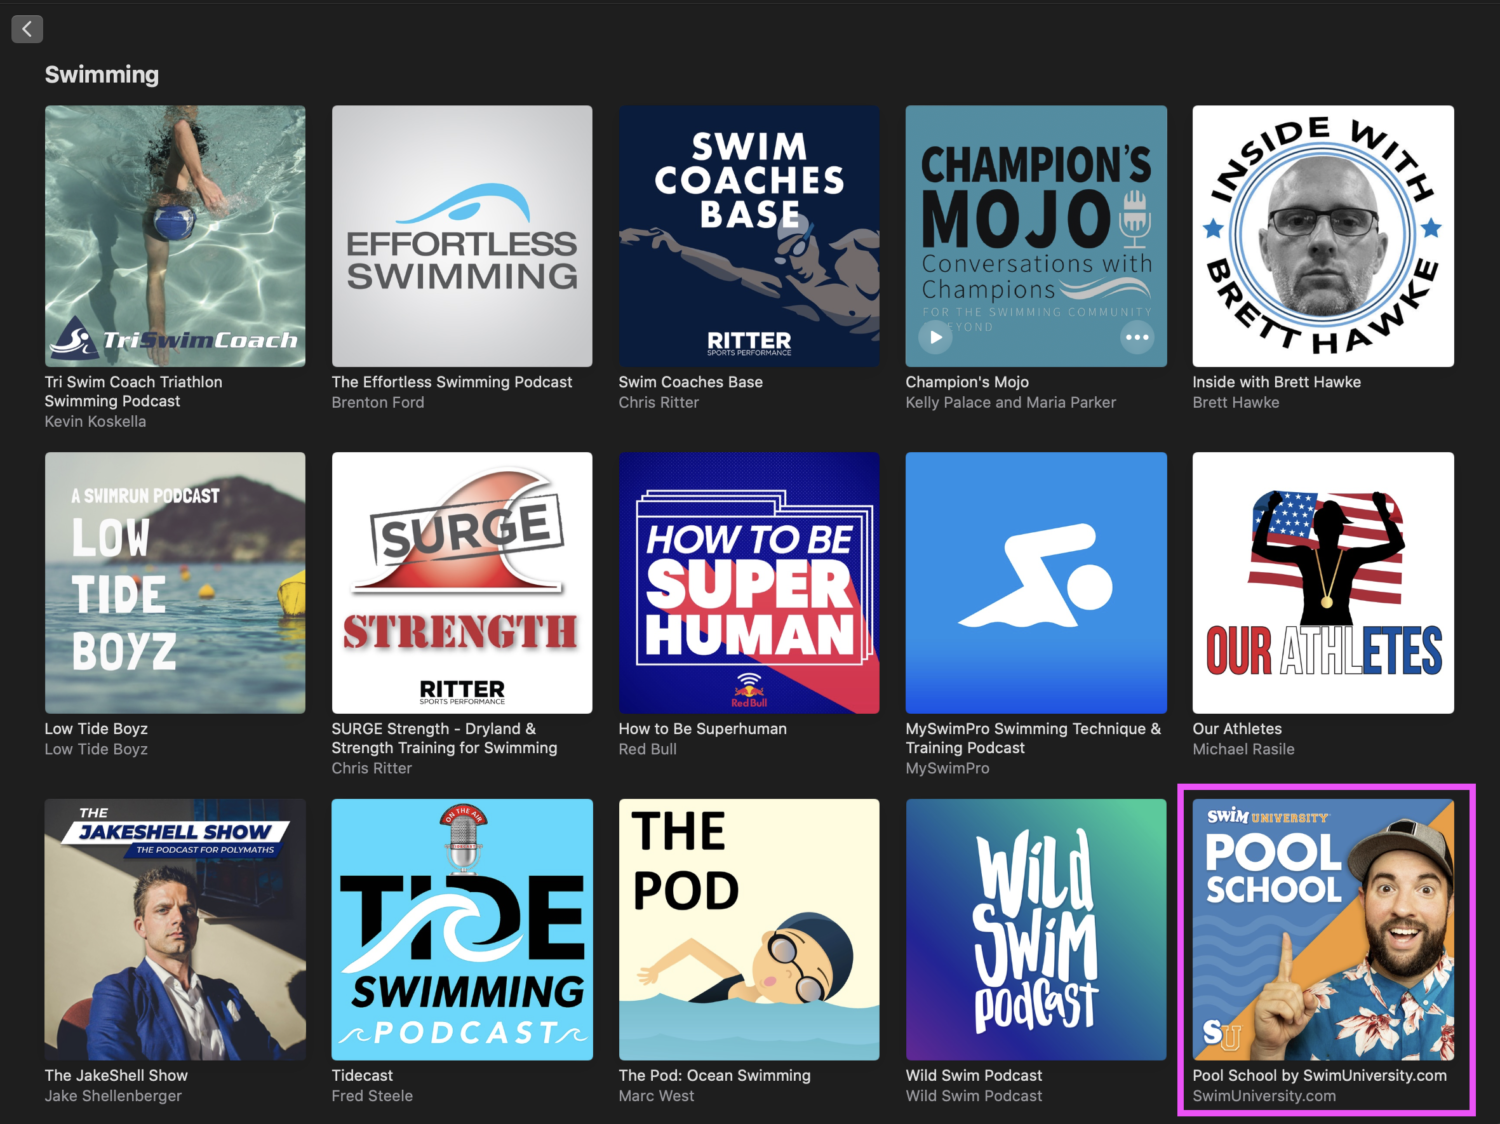 Ranked 15th in Apple Podcasts Swimming Category